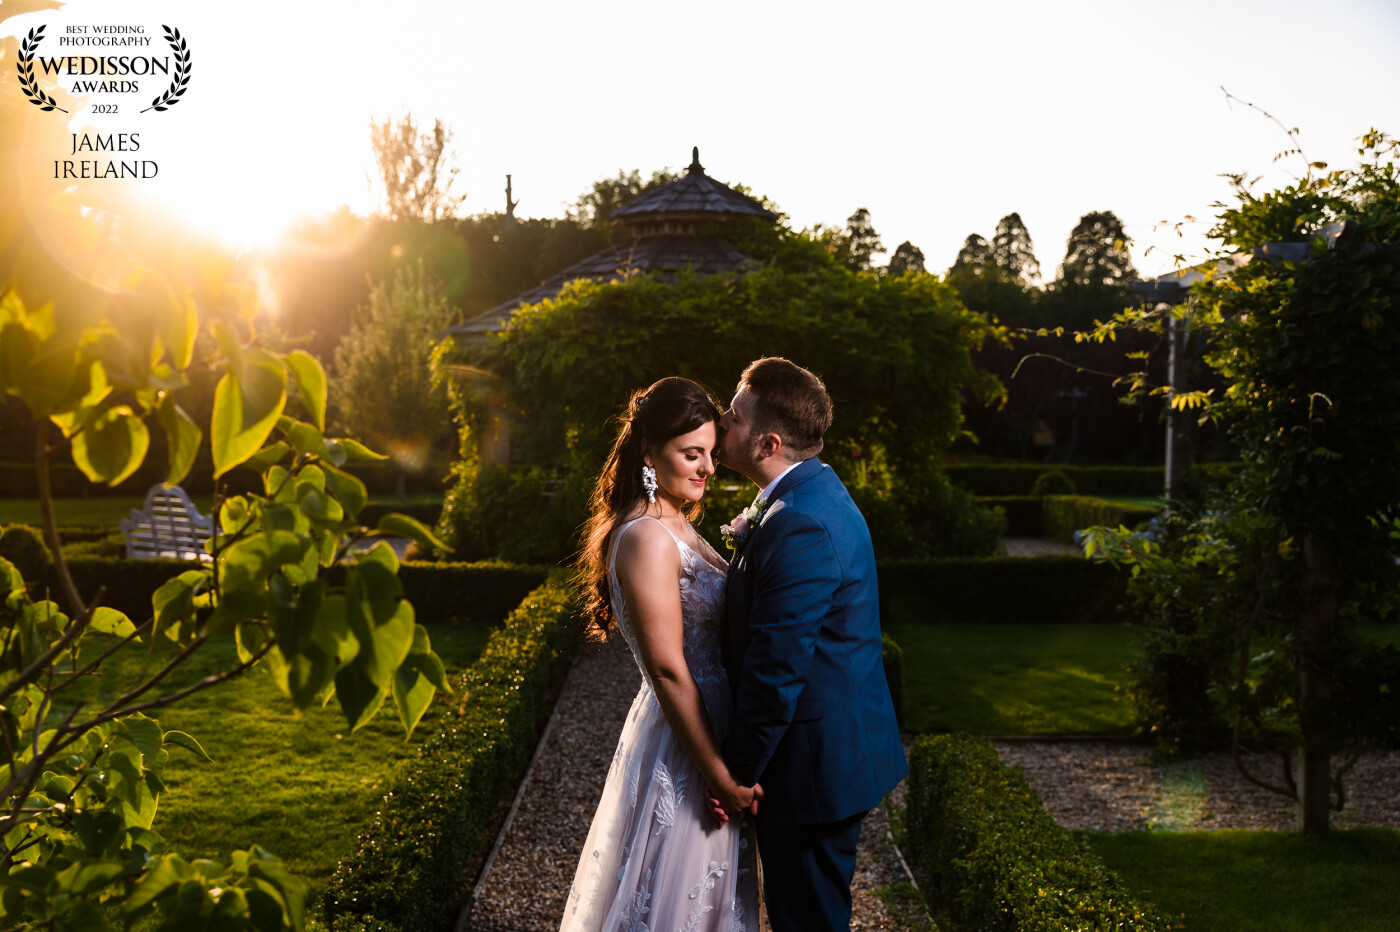 We got so lucky with the golden hour light at Lily & Charlie’s wedding, considering we’d had a little rain earlier in the day. I’m always looking for symmetry and leading lines in my compositions, and the paths at pergola at The Secret Garden always lend themselves nicely to this. I used the sunlight to rim light the couple and had a flash with a small octabox to fill in the shadows on their faces. The sun’s flare was just an added bonus!